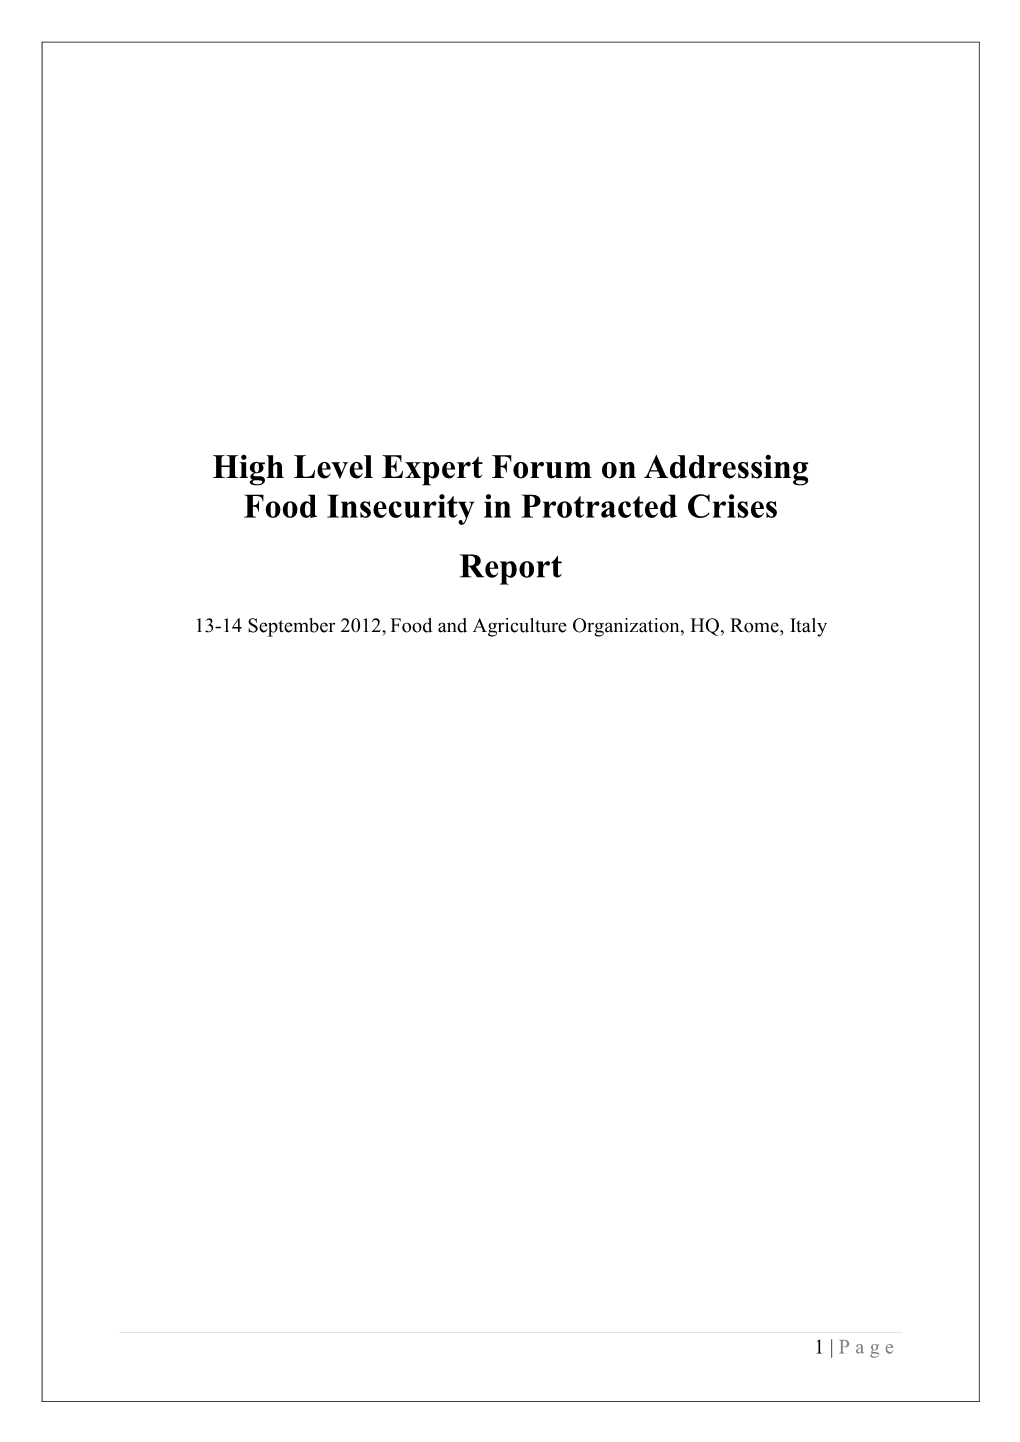 High Level Expert Forum on Addressing Food Insecurity in Protracted Crises Report